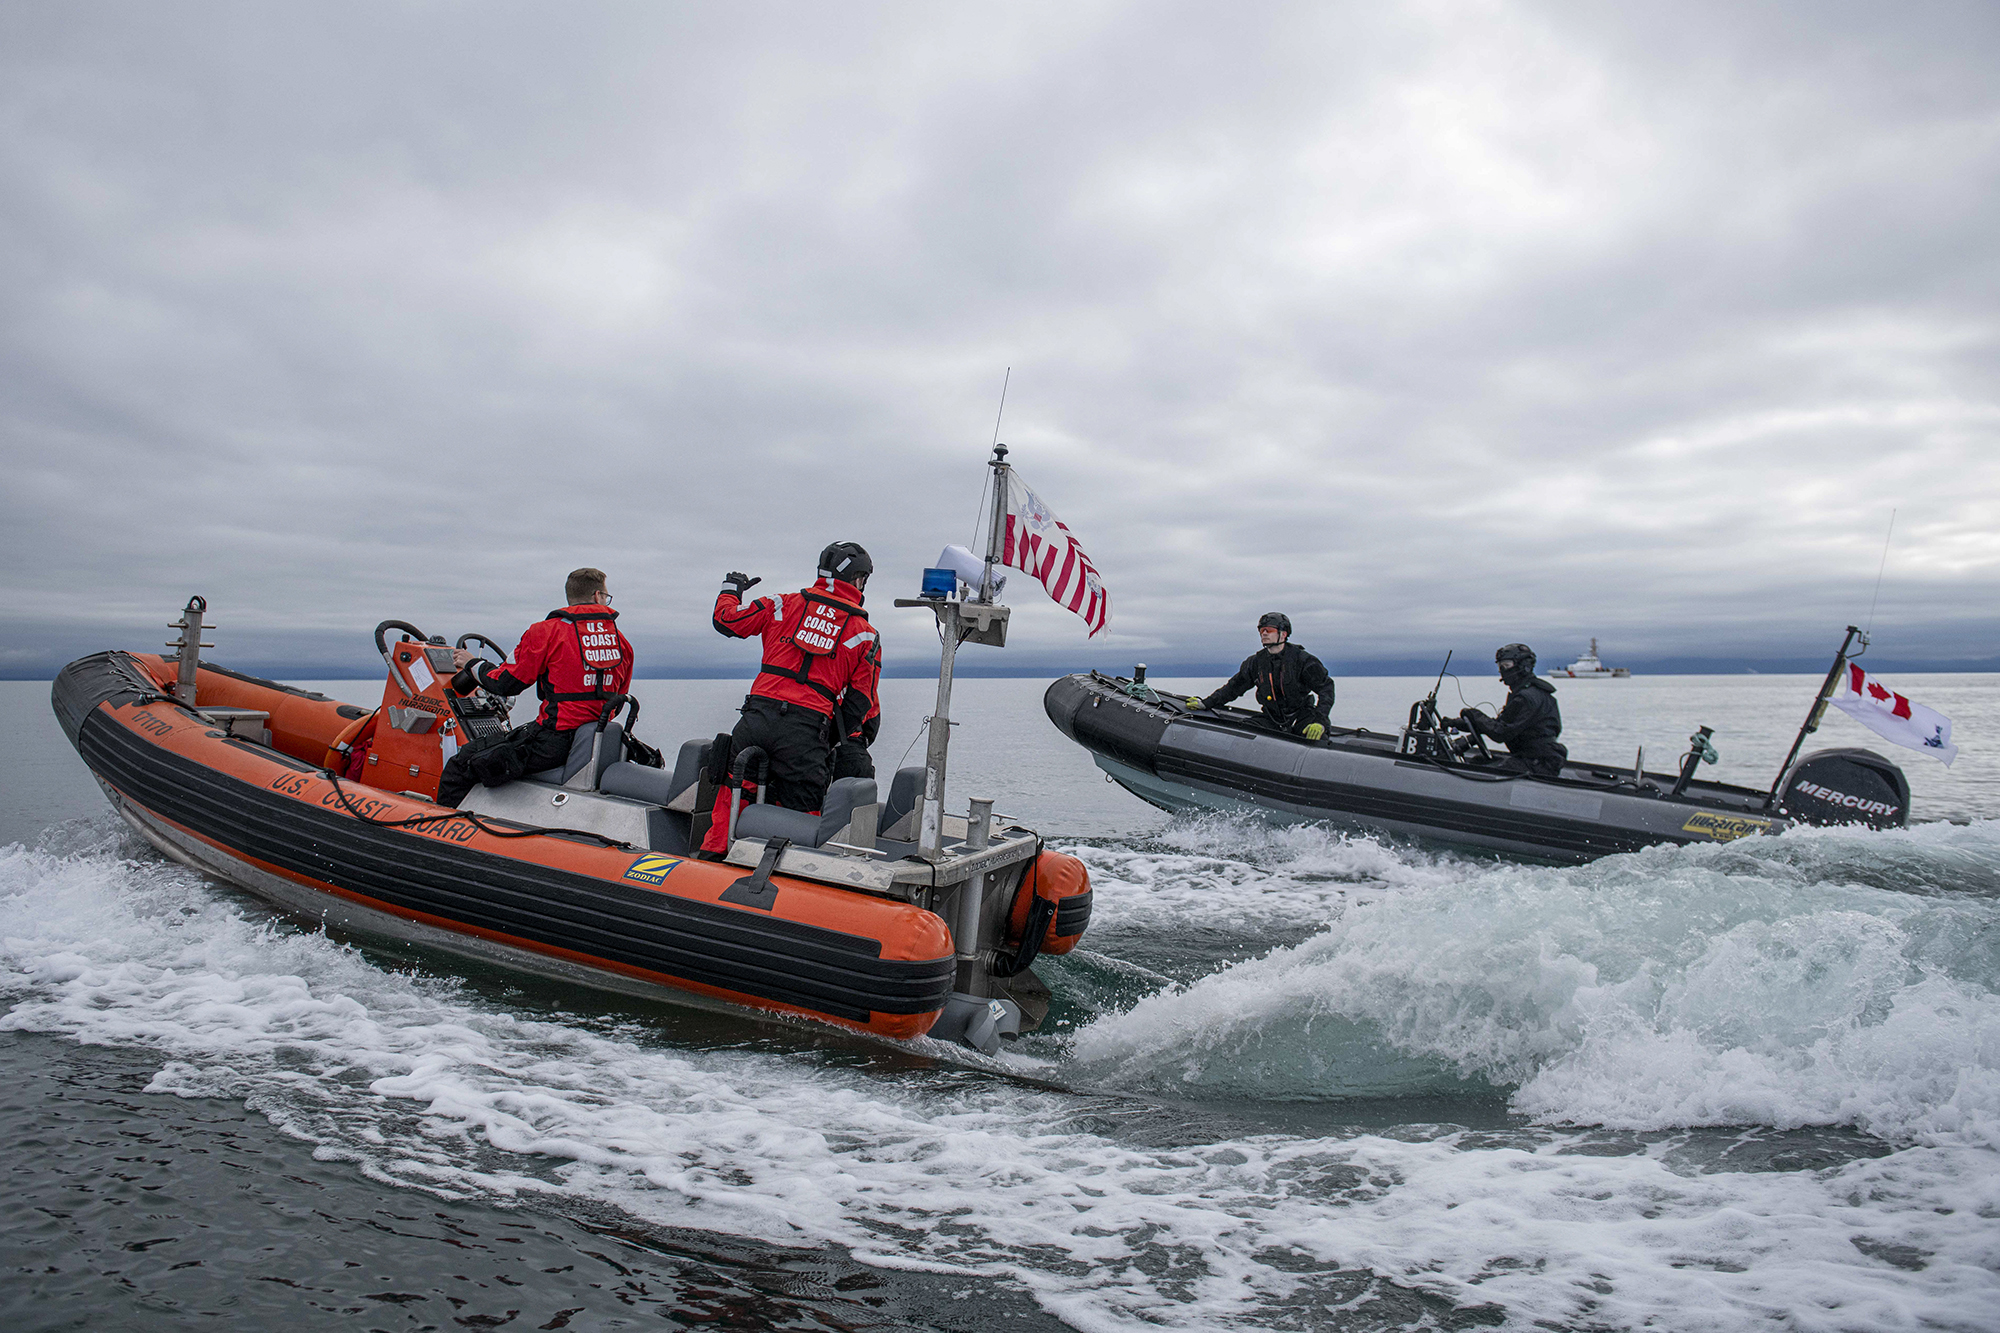 Royal Canadian Navy members from HMCS Yellowknife conduct Rigid Hull Inflatable Boat (RHIB) training with U.S. Coast Guard members in the waters off Victoria, British Columbia, Canada, on Feb. 18, 2022. The exercise was conducted to prepare Royal Canadian Navy members for upcoming deployments to support United States counter-narcotics operations. Photo: Royal Canadian Navy